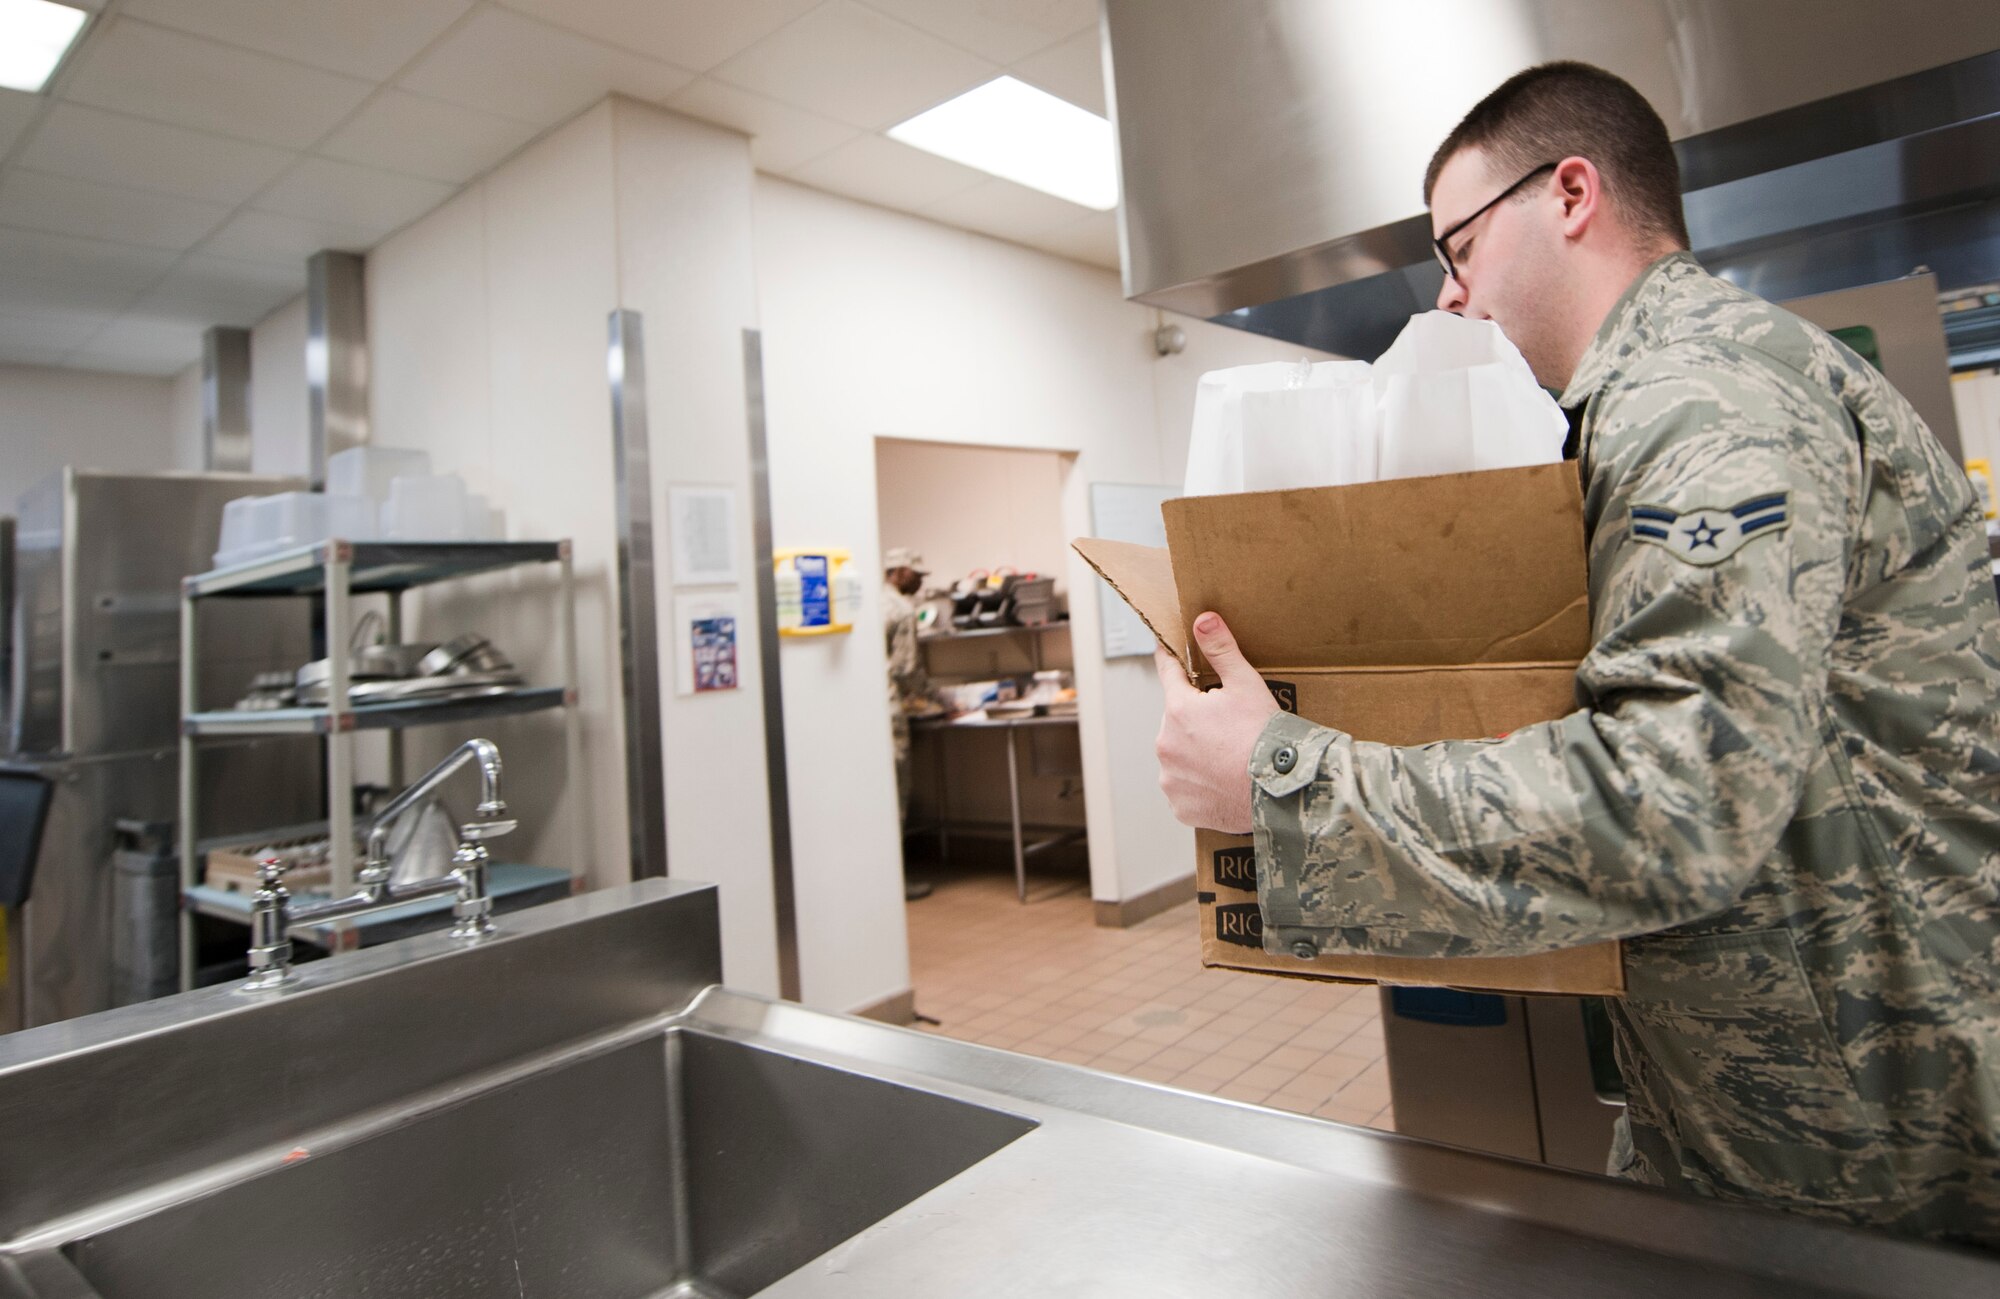 Airman 1st Class Daniel Allen, 1st Special Operations Equipment Maintenance Squadron armament apprentice, picks up flight meals for his shop at the Riptide Dining Facility on Hurlburt Field, Fla., Feb. 6, 2014. Maintainers are one of the main groups of Airmen who order flight meals from the flight kitchen. (U.S. Air Force photo/Senior Airman Krystal M. Garrett)  